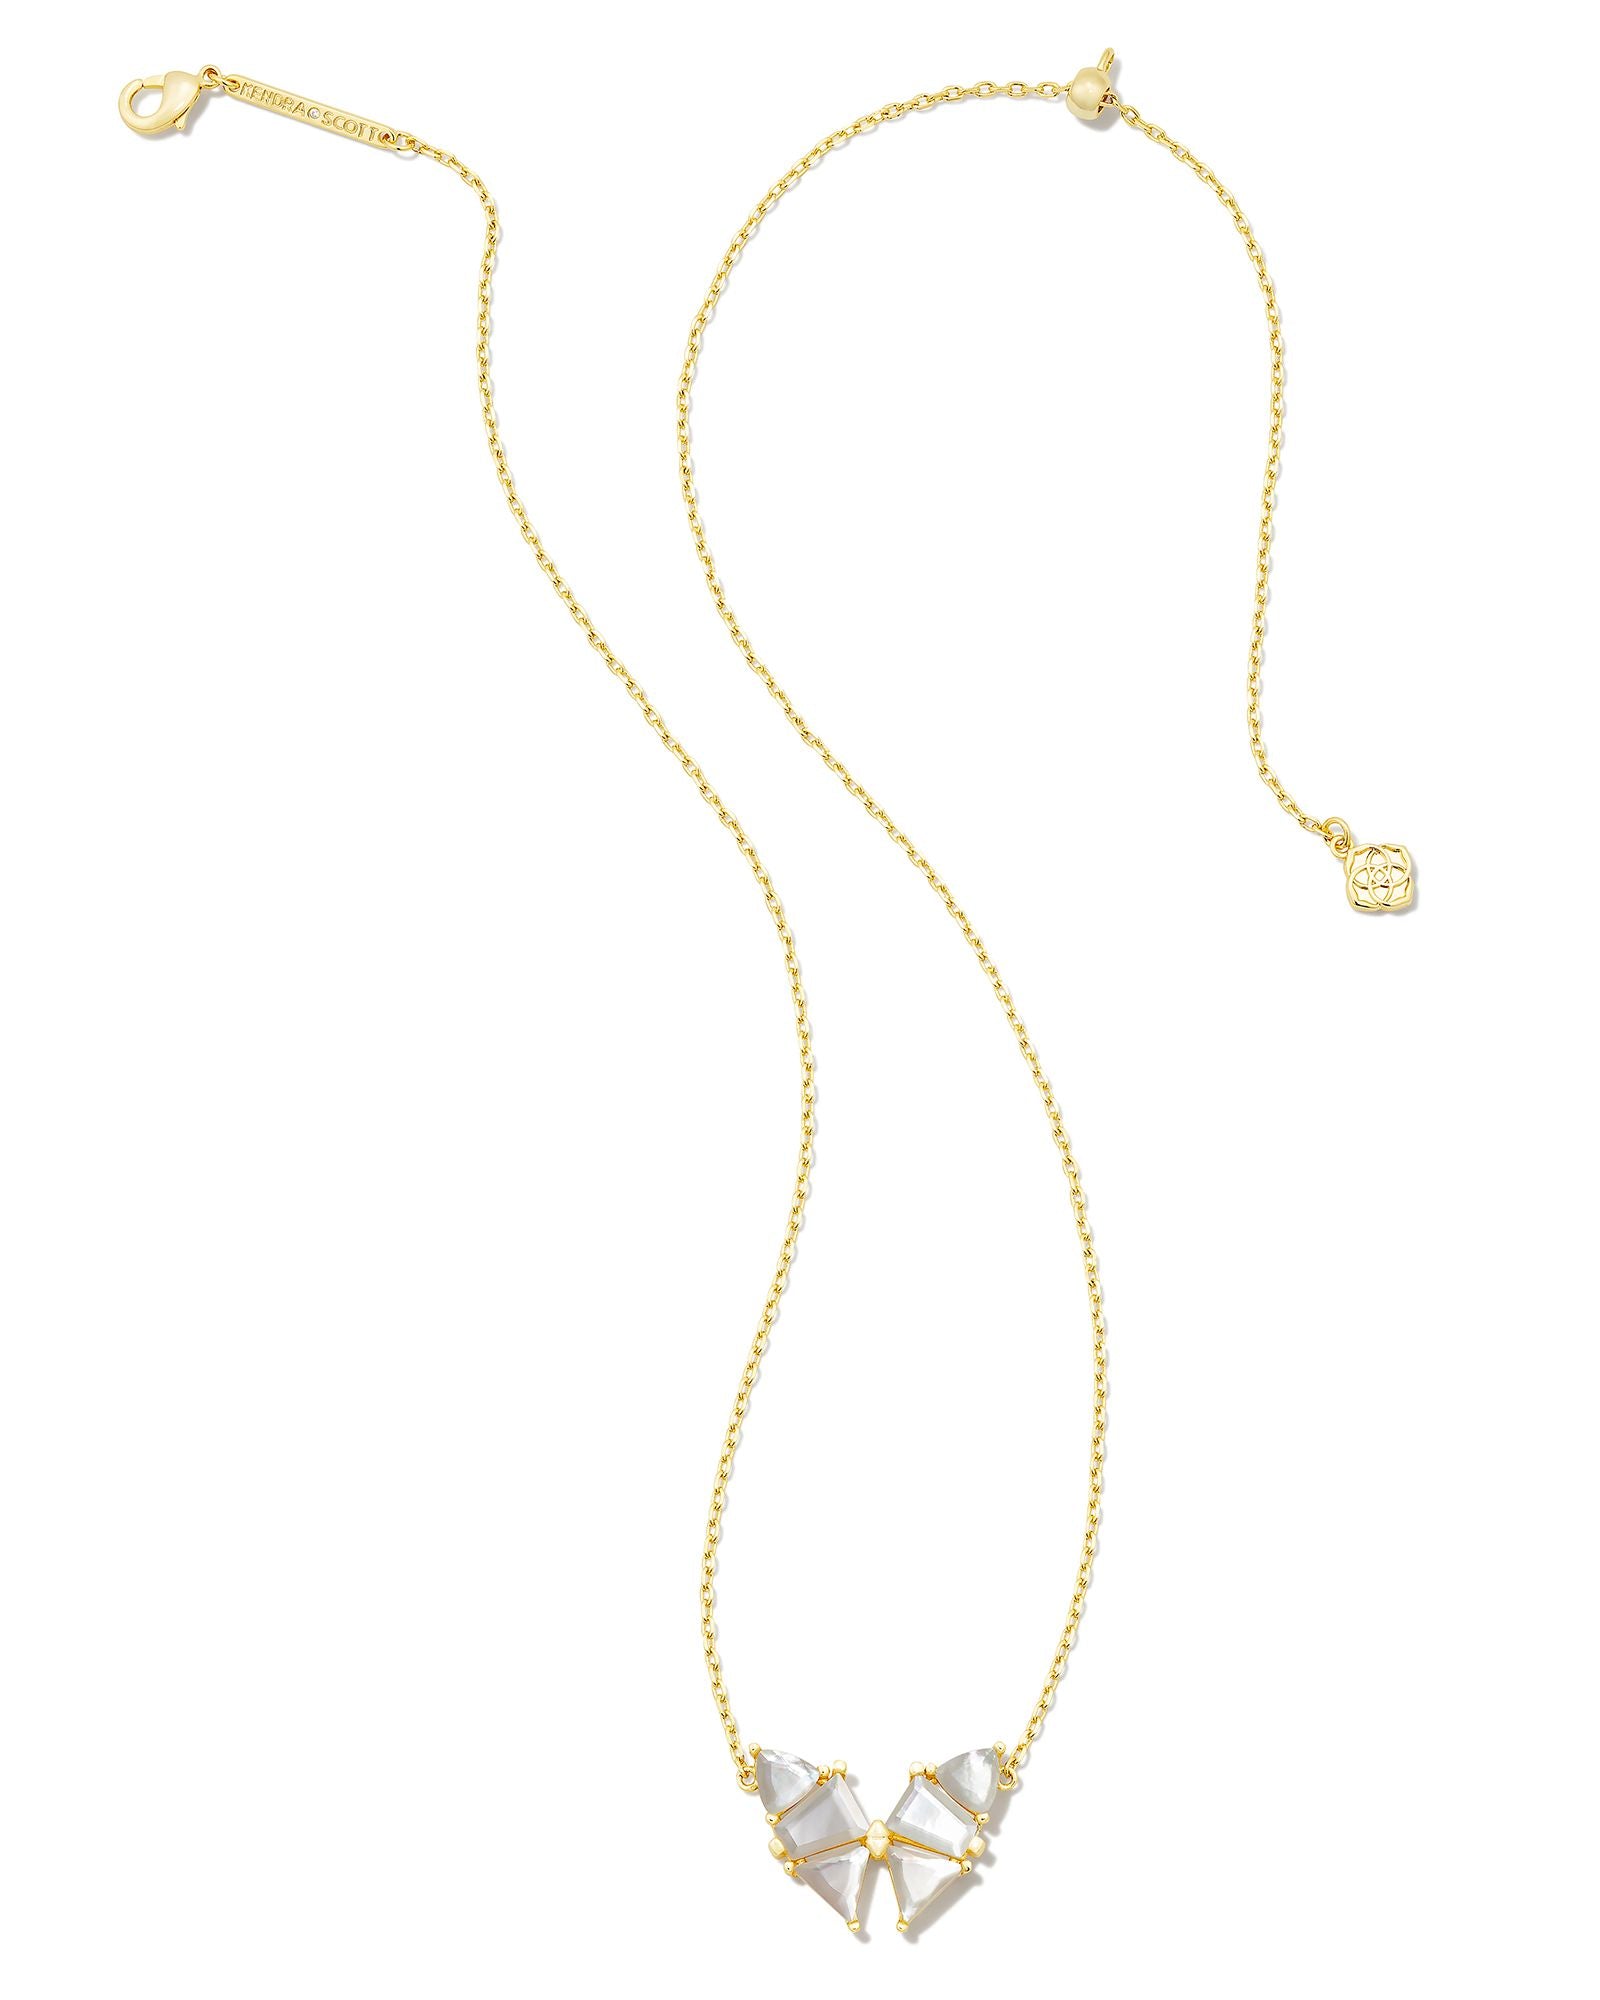 Sale Blair Butterfly Necklace Gold Ivory MOP